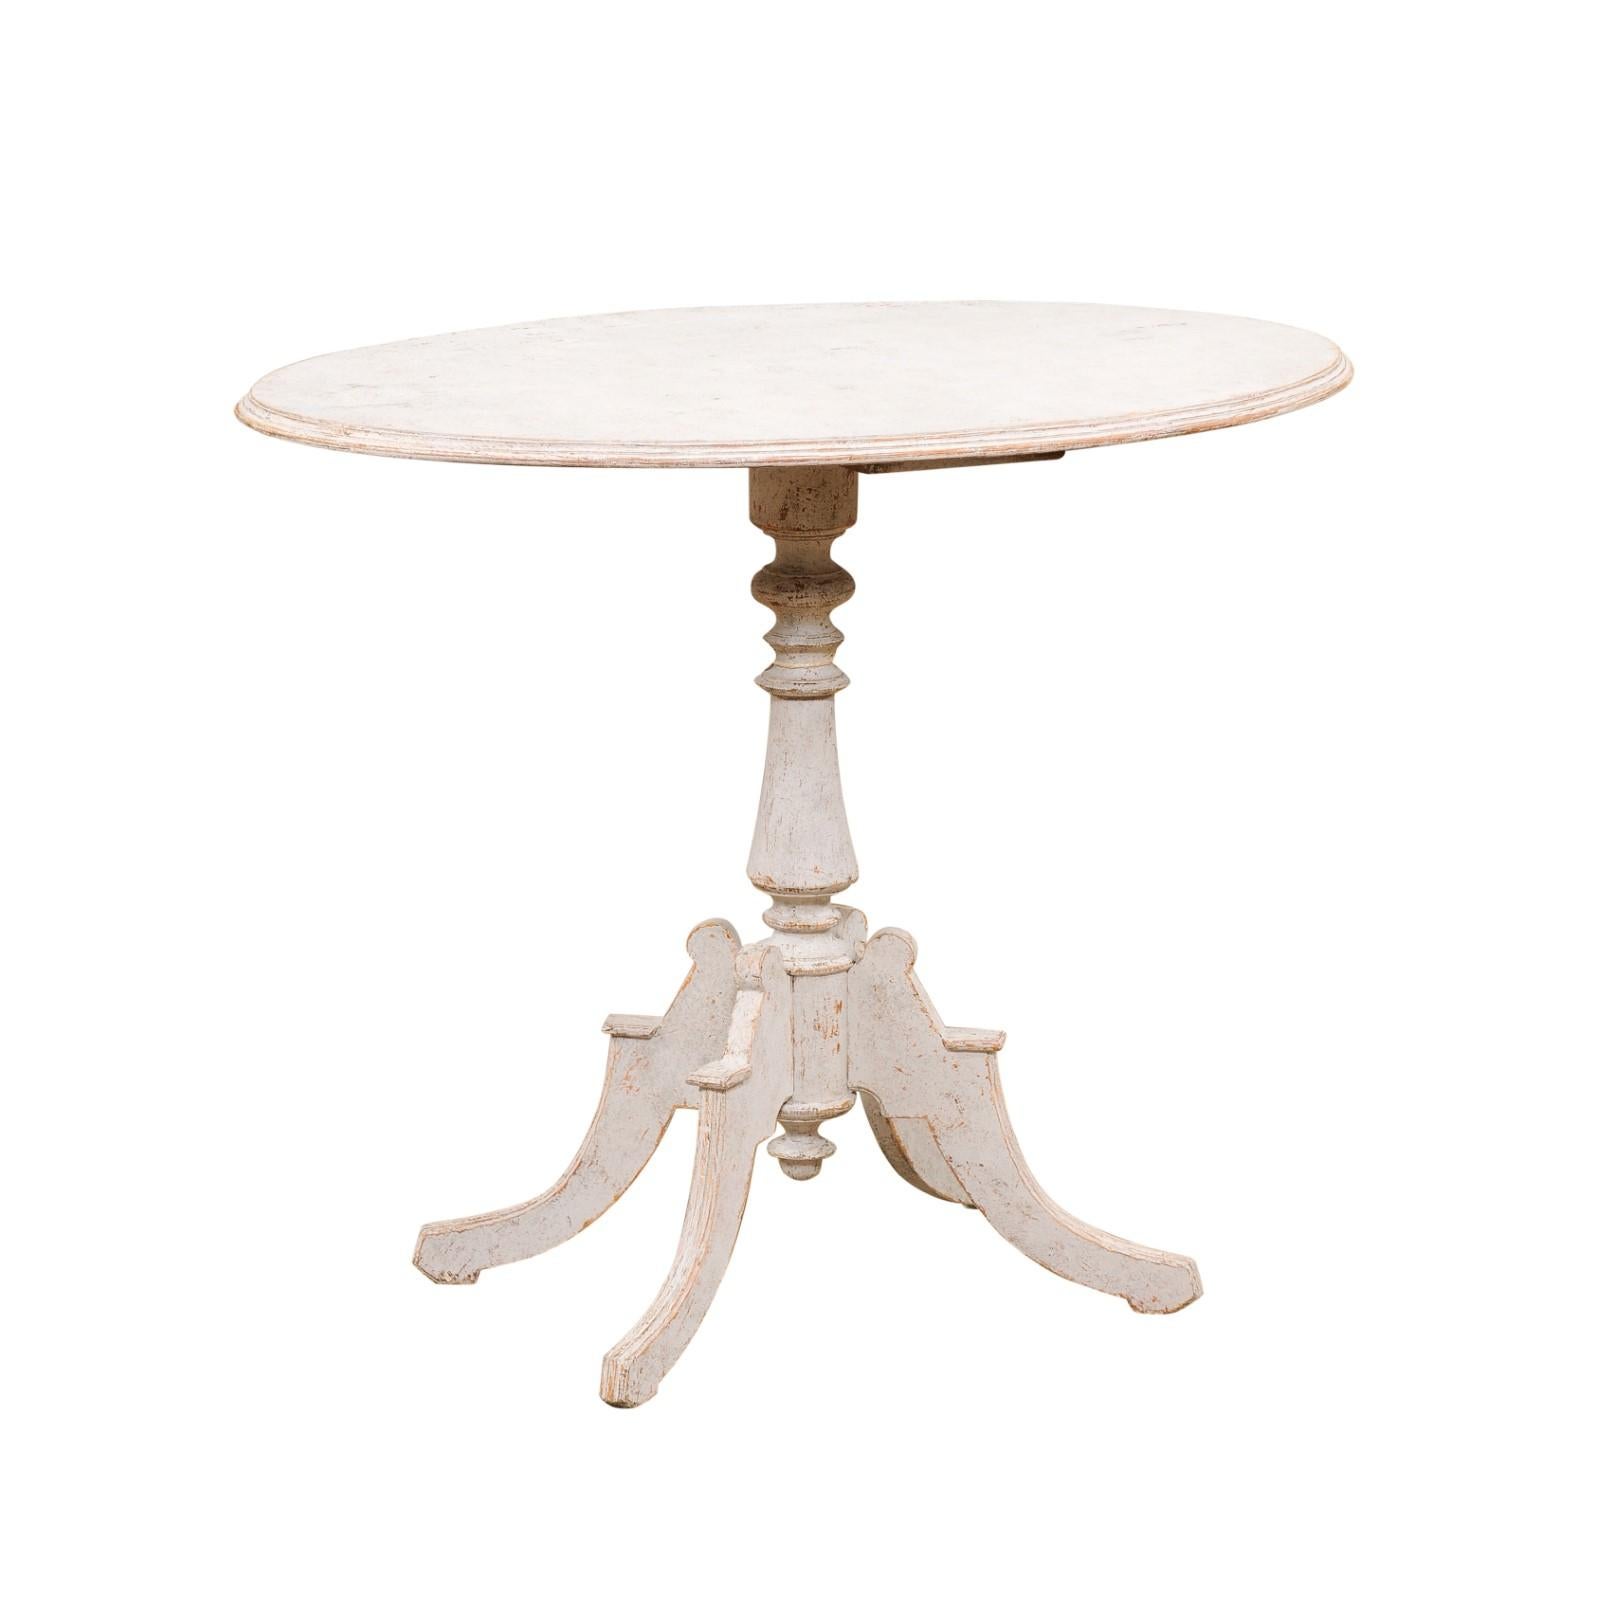 A Swedish painted wood guéridon side table from the late 19th century, with oval top, turned pedestal, quadripartite scrolling base, low finial and distressed patina. Created in Sweden during the last quarter of the 19th century, this painted